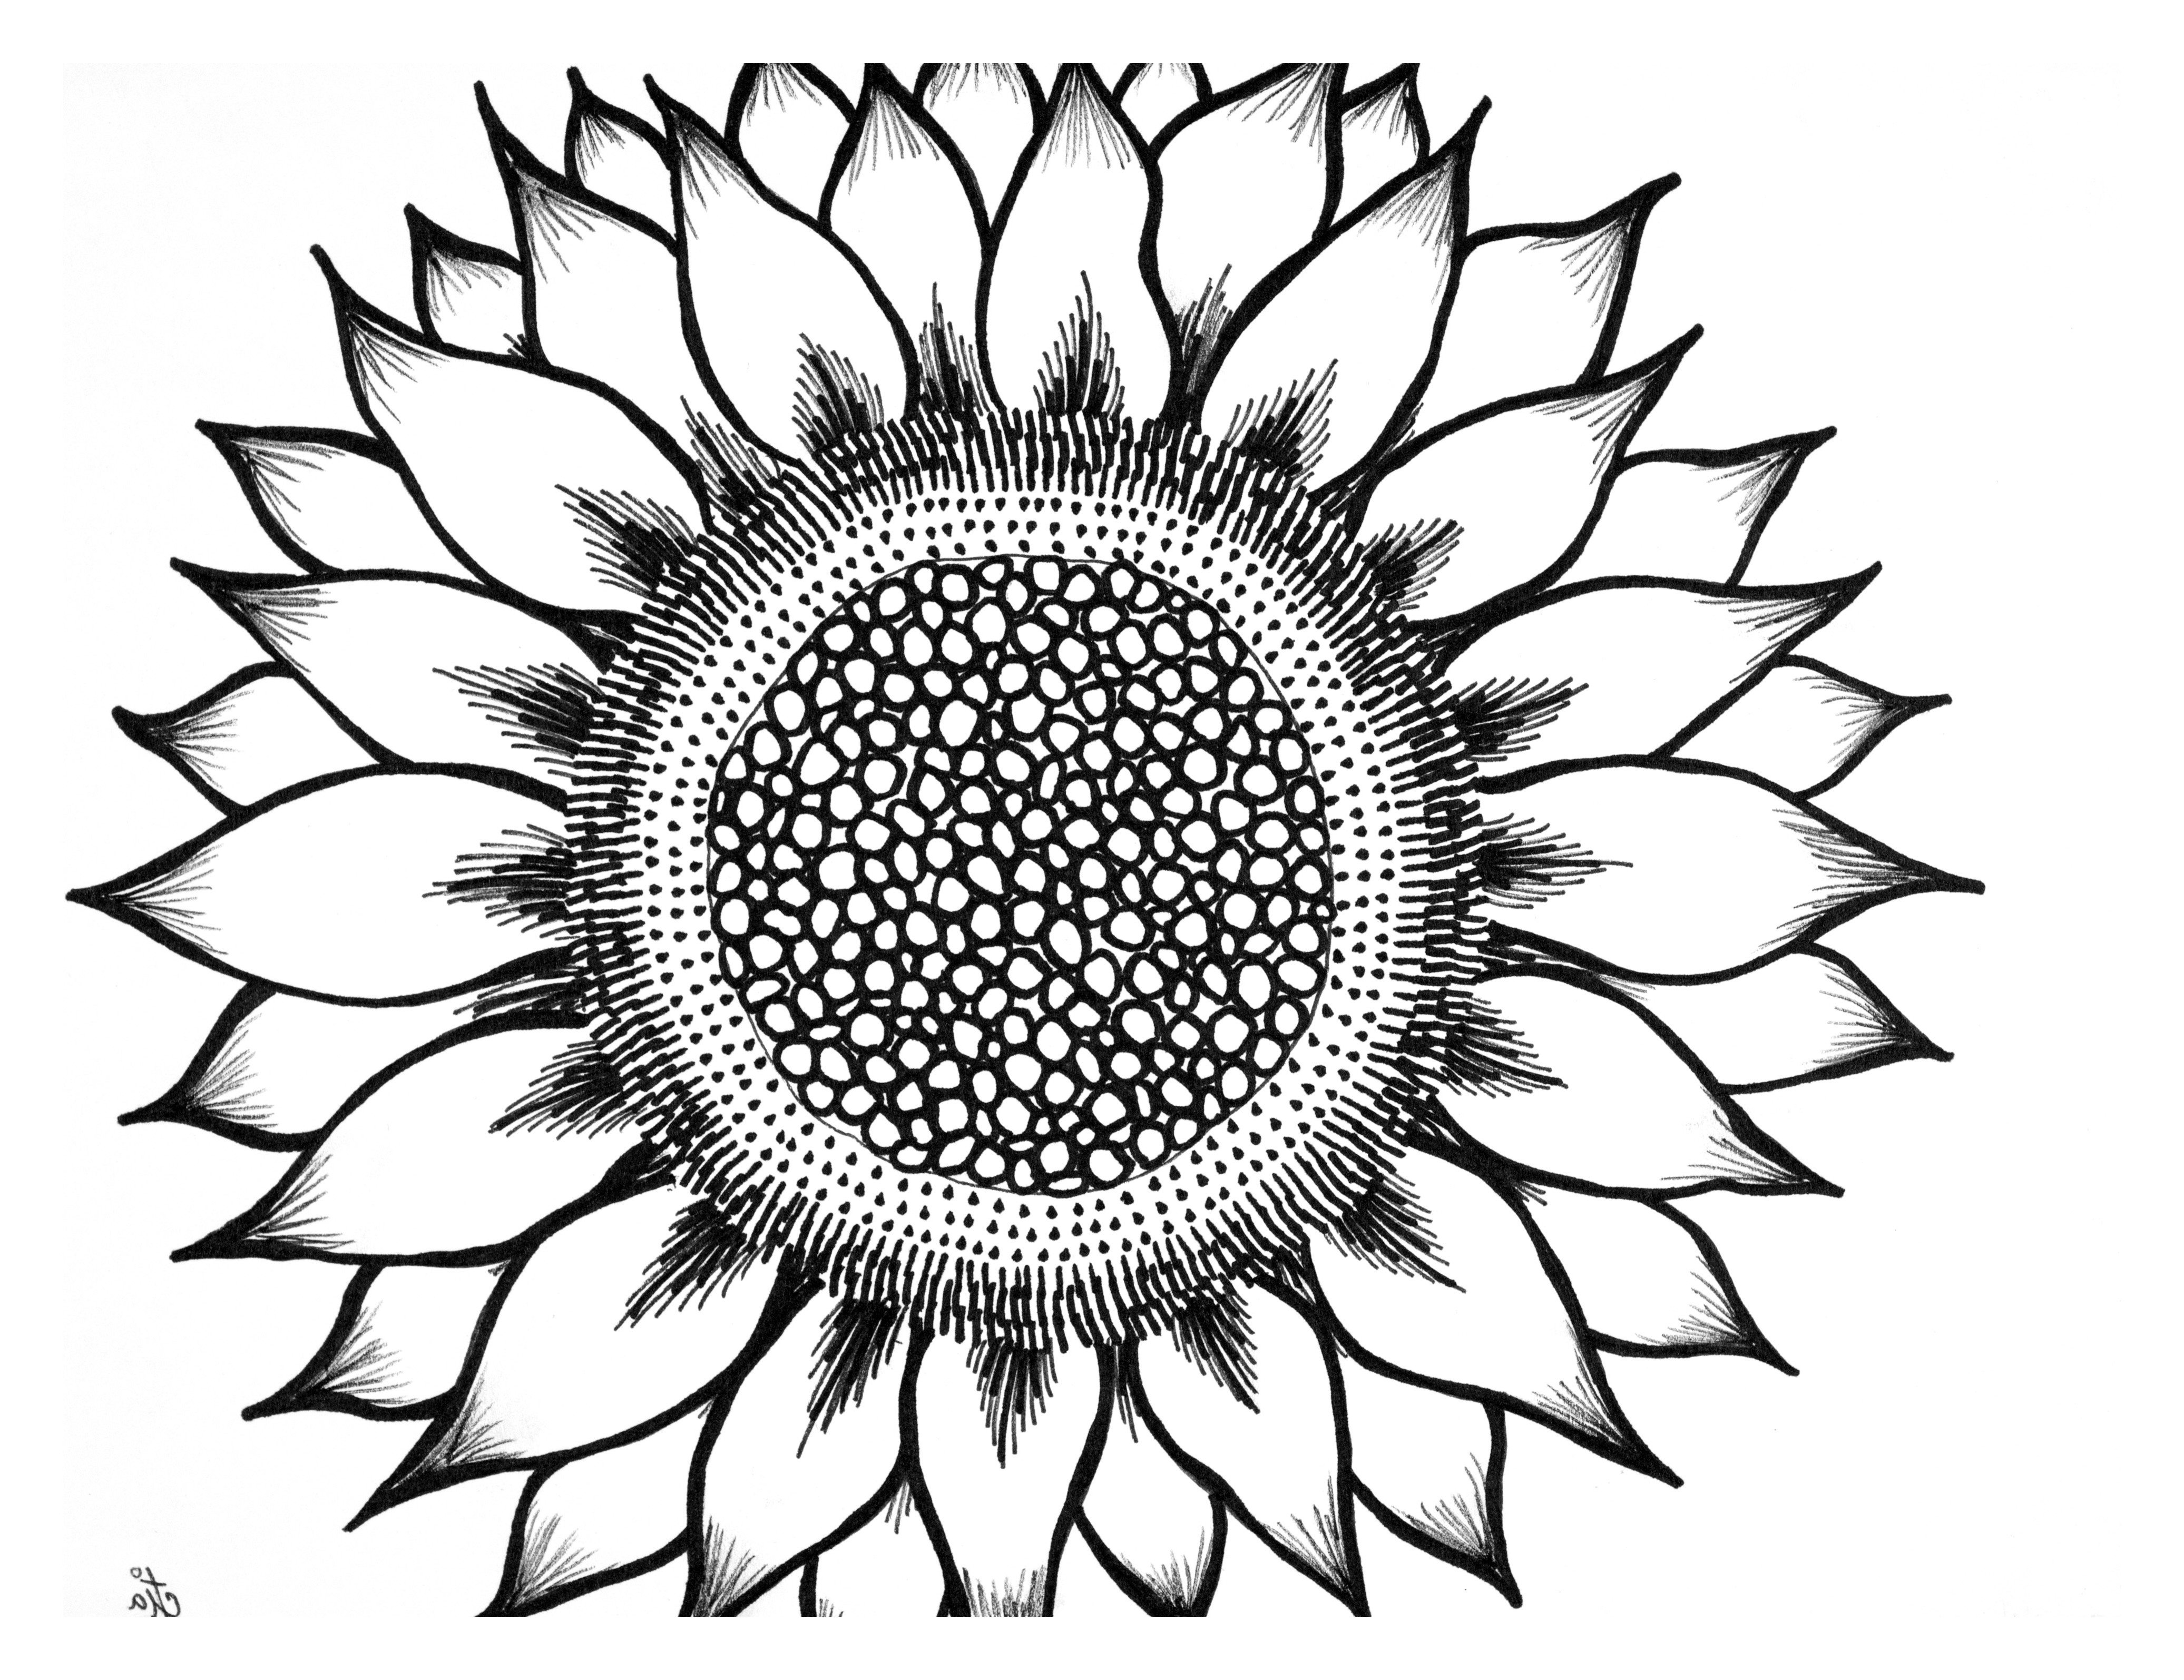 Sunflower black and white black and white sunflower drawing.